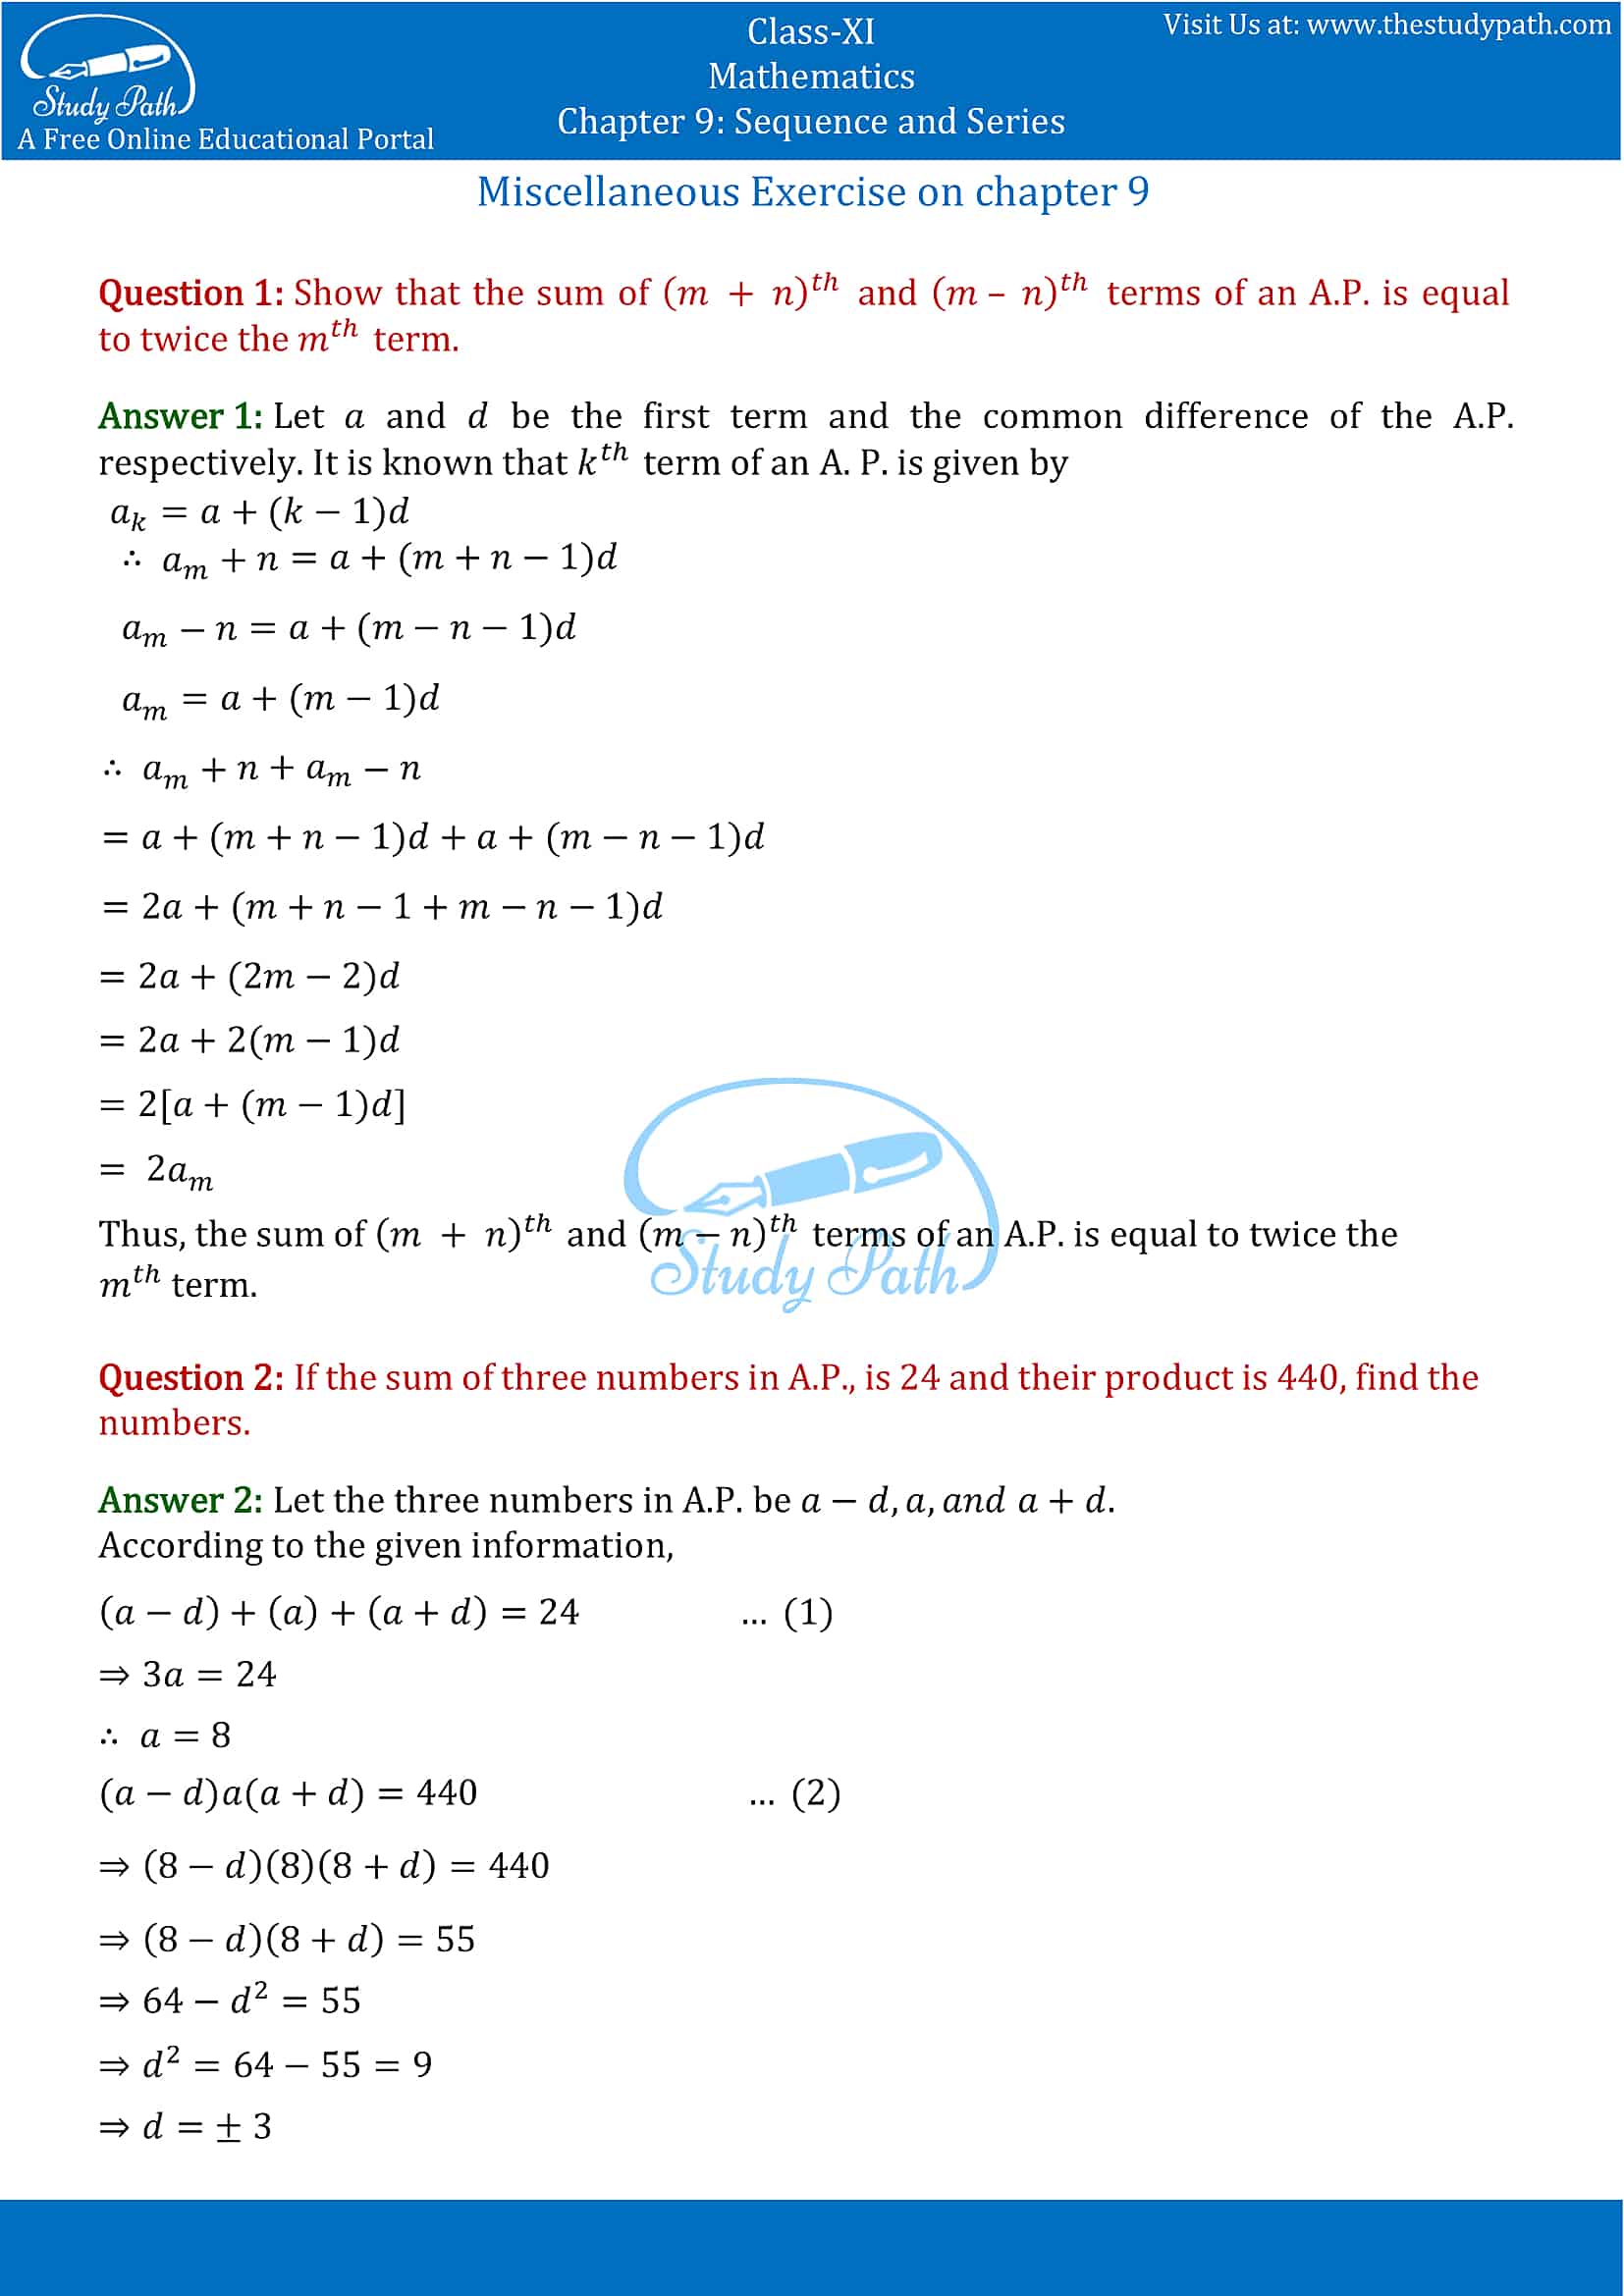 NCERT Solutions for Class 11 Maths chapter 9 Sequence and Series Miscellaneous Exercise Part-1